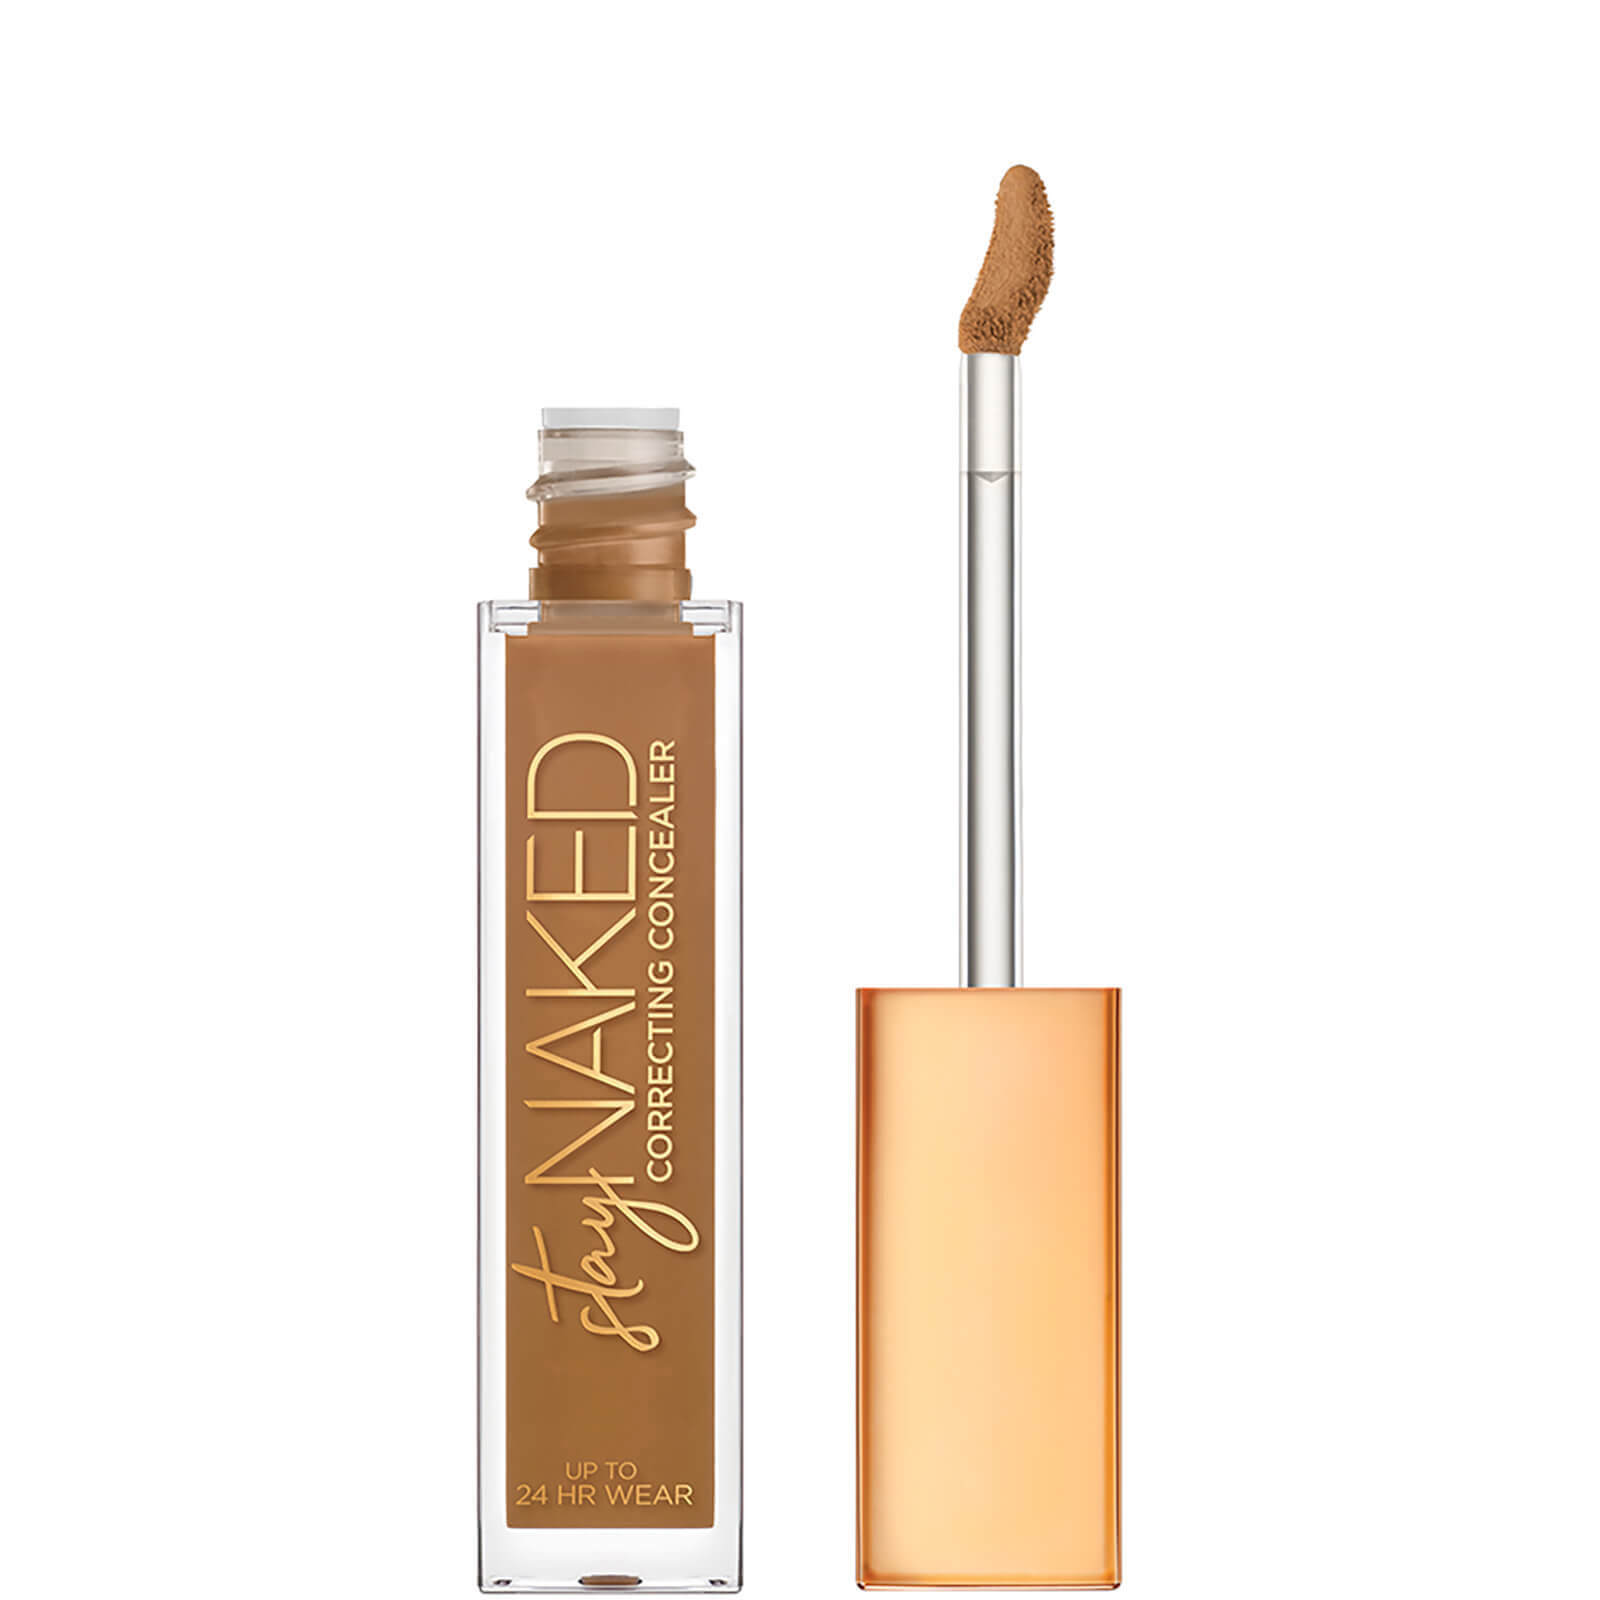 Urban Decay Stay Naked Concealer (Various Shades) - 60NN